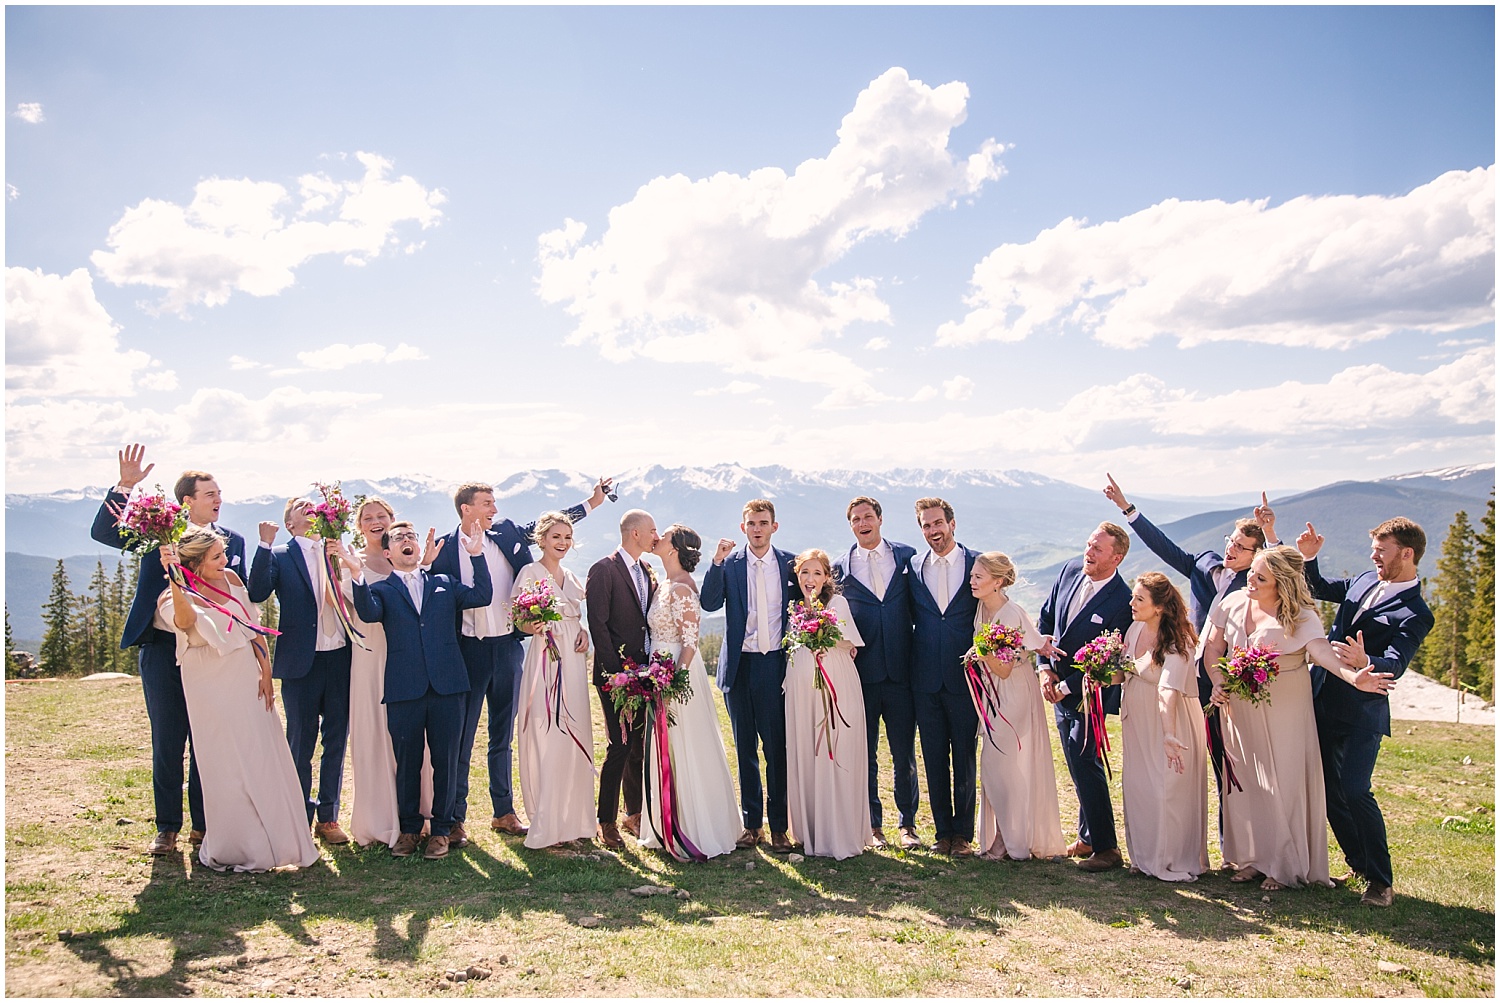 Light pink bridesmaid dresses and dark navy suits for the groomsmen at Keystone Colorado wedding